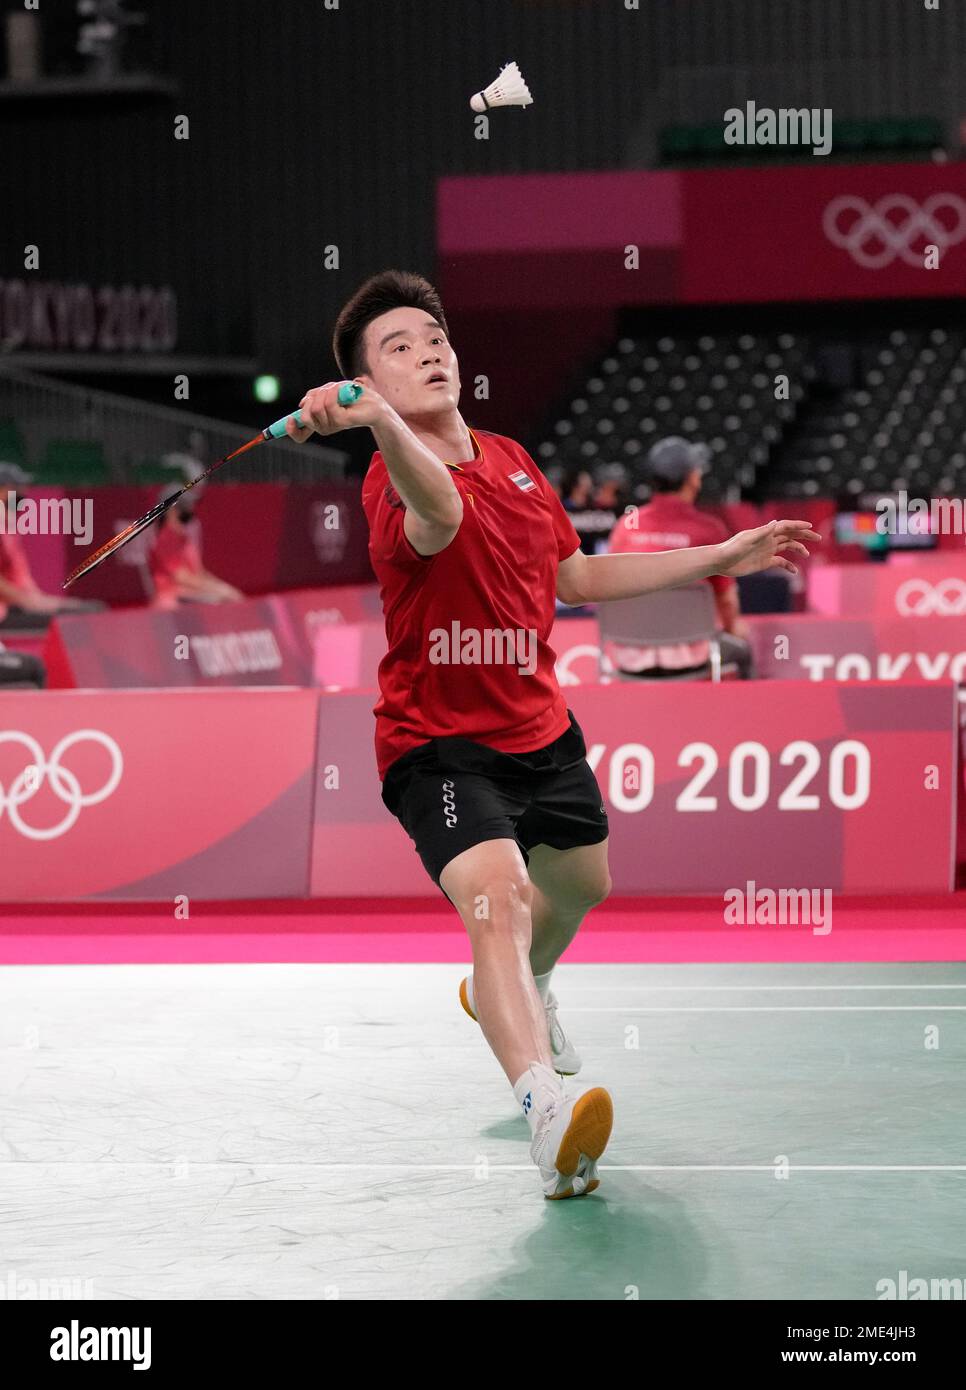 Kantaphon Wangcharoen of Thailand competes against Germanys Kai Schaefer during mens singles Badminton match at the 2020 Summer Olympics, Sunday, July 25, 2021, in Tokyo, Japan